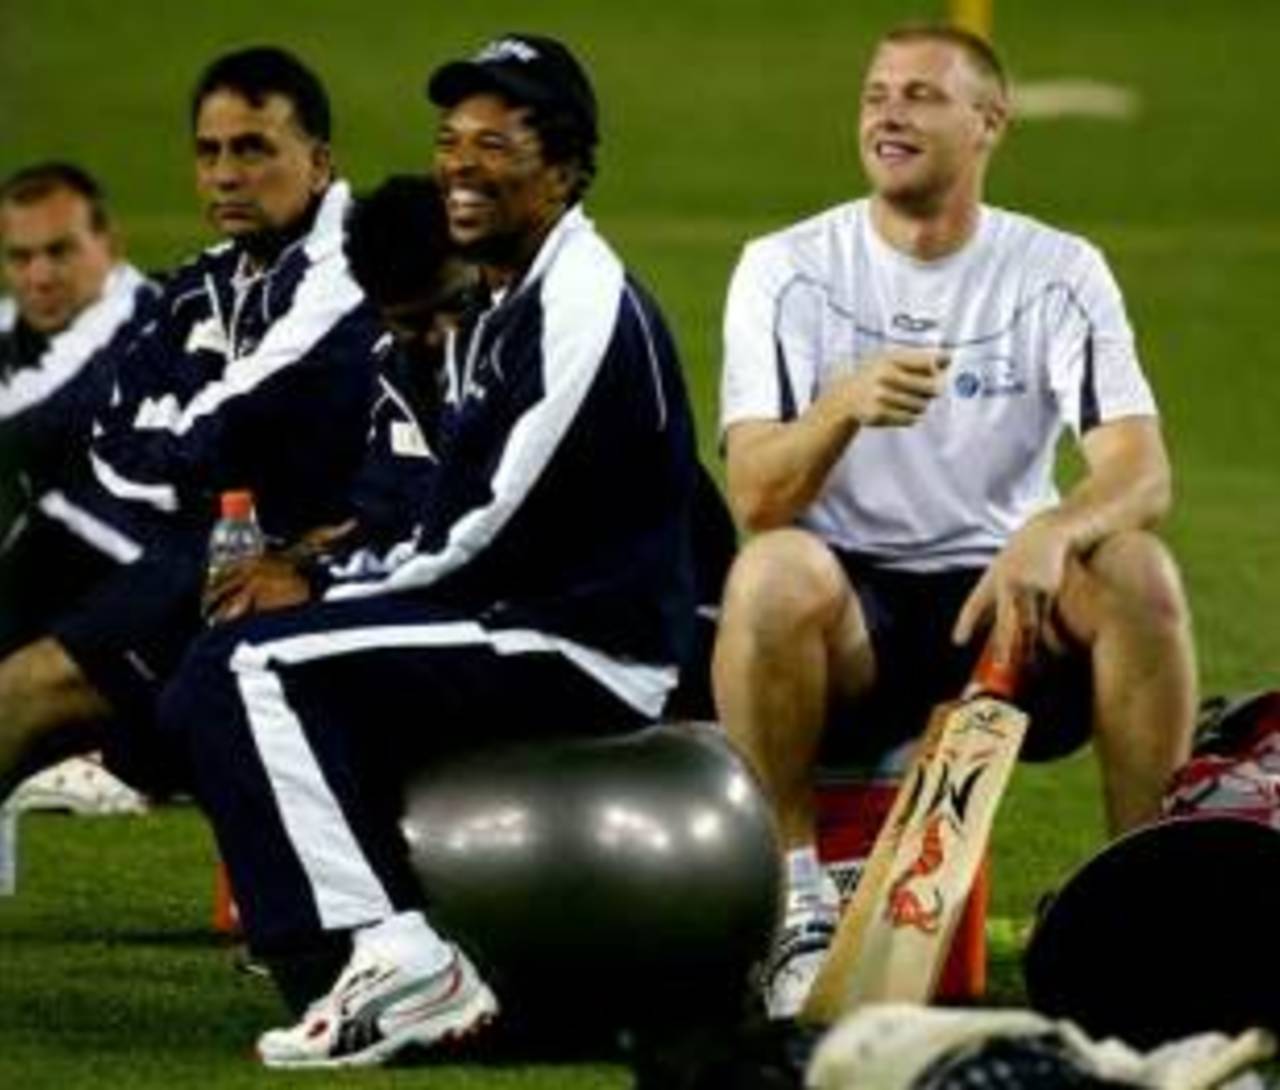 Makhaya Ntini and Andrew Flintoff are Venkatesh Prasad's targets during the second edition of the IPL in South Africa&nbsp;&nbsp;&bull;&nbsp;&nbsp;Getty Images